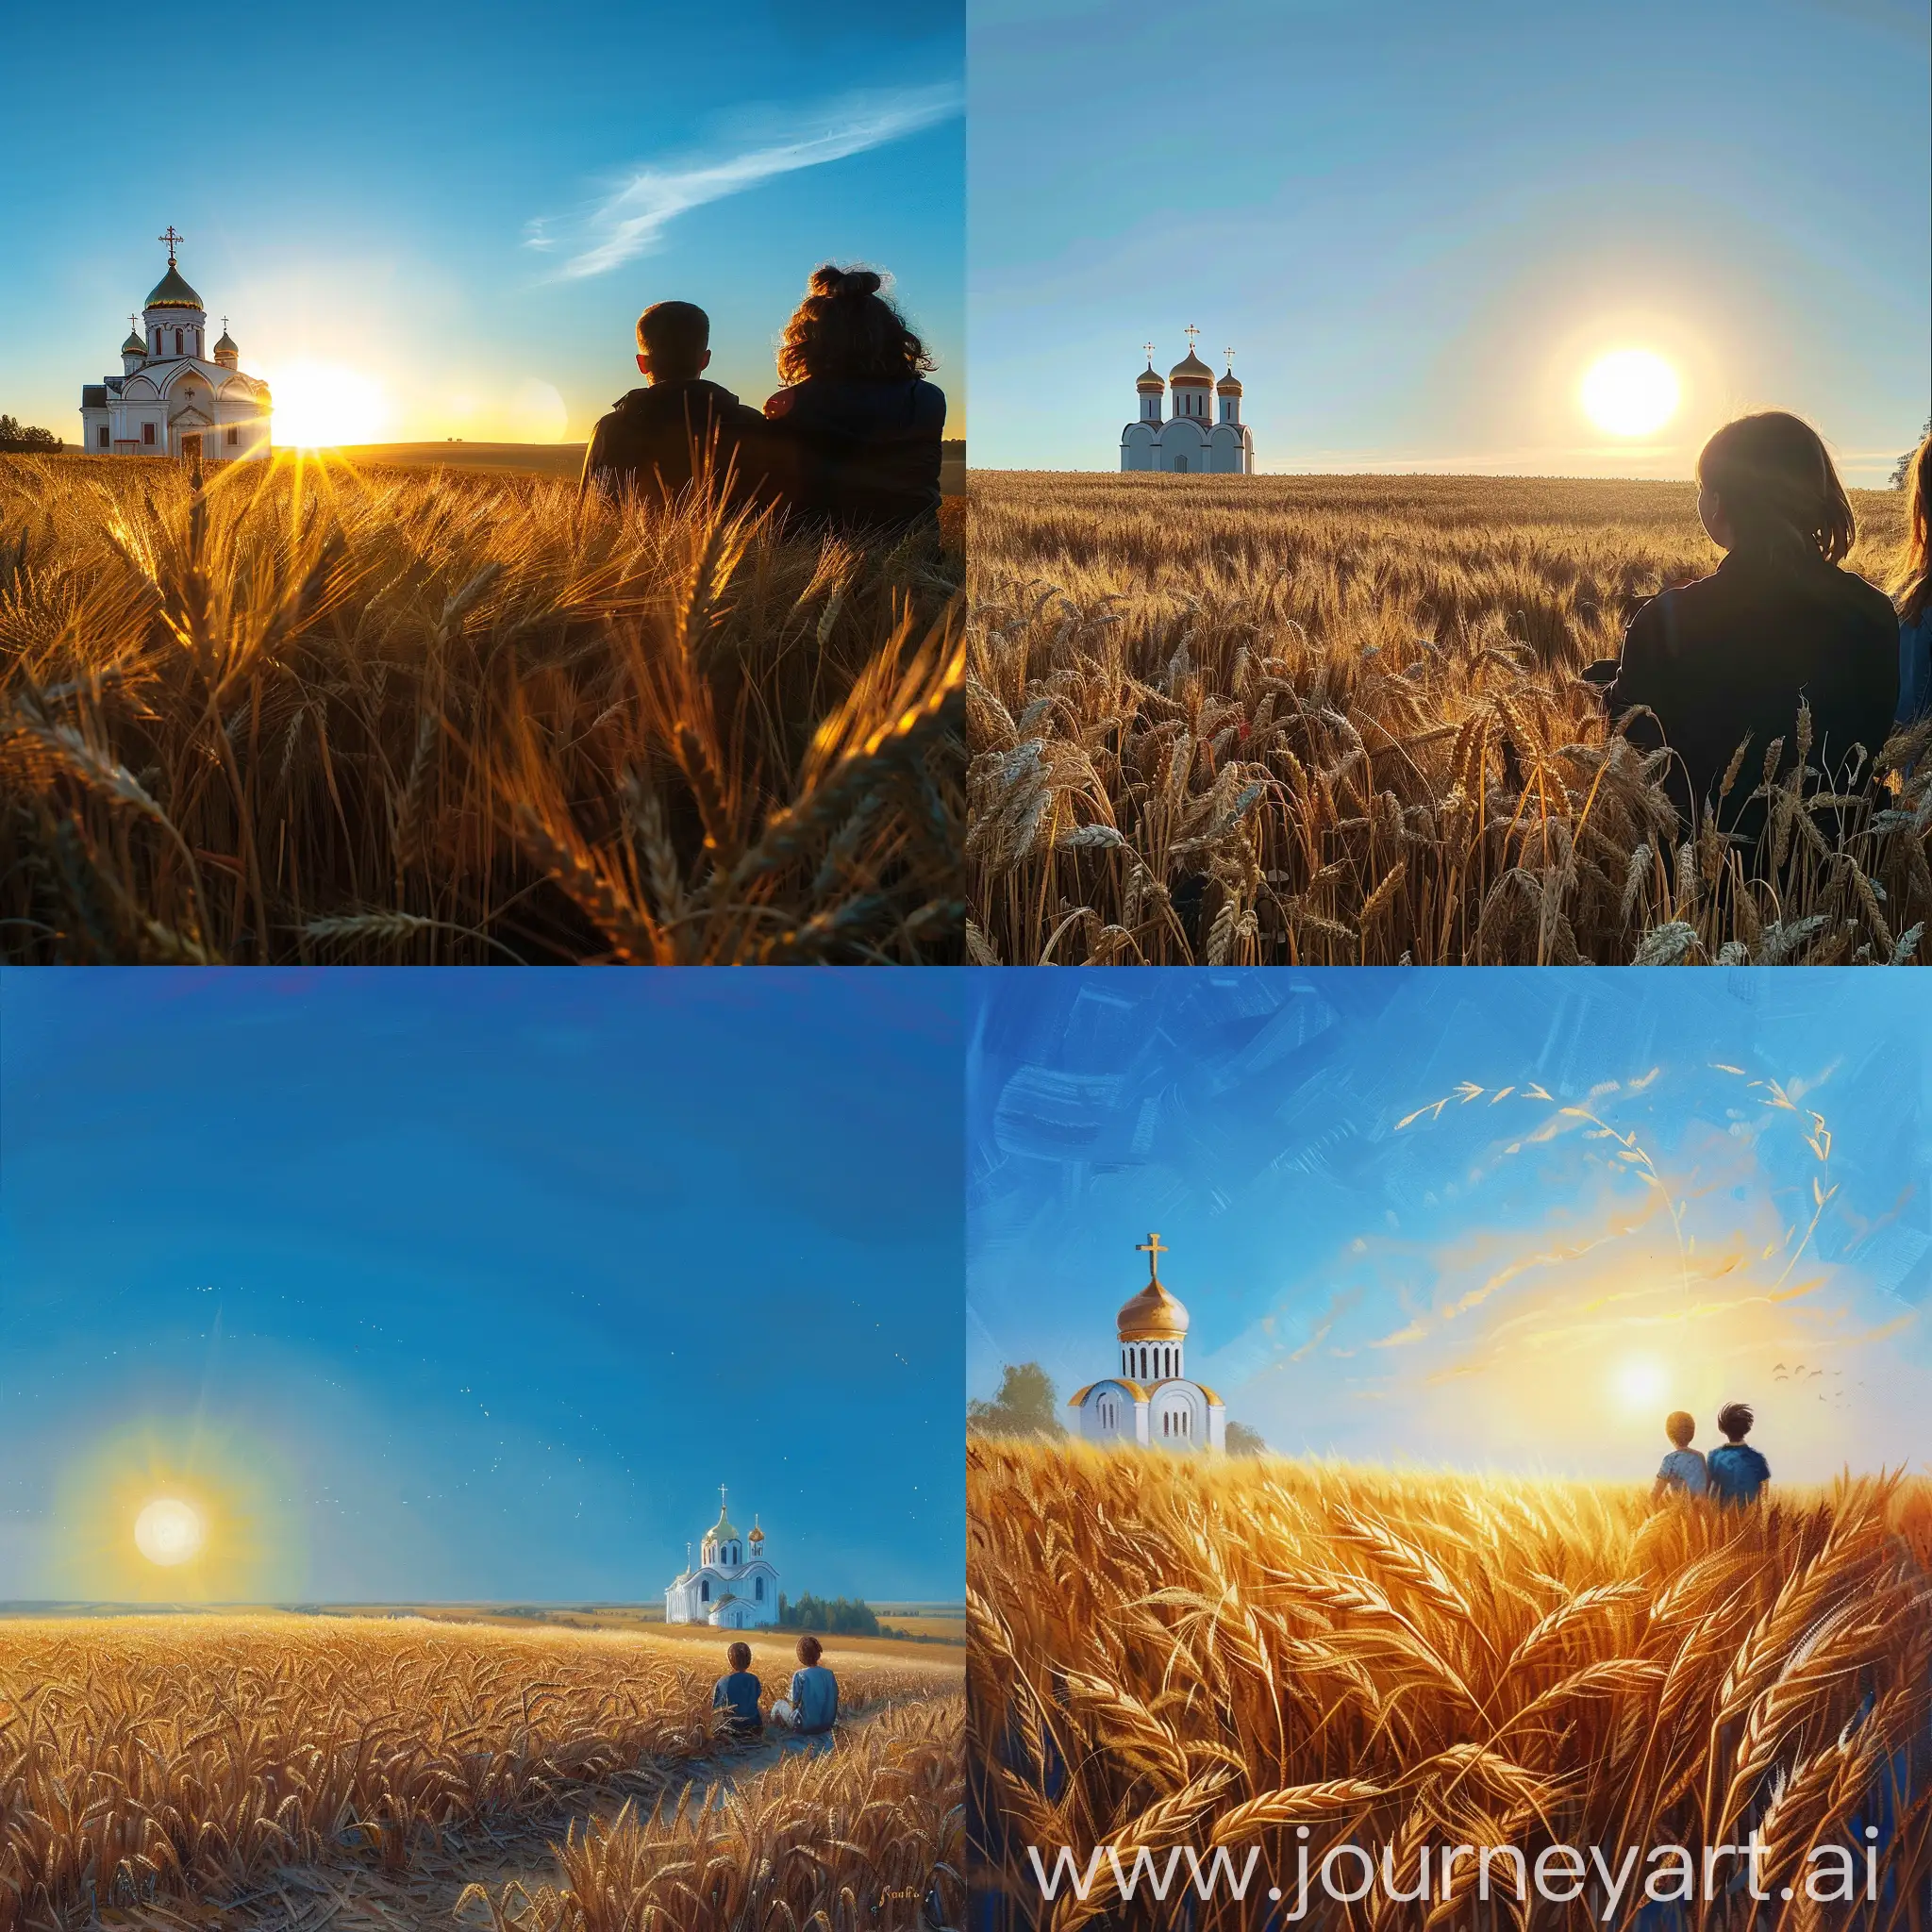 Morning-Serenity-Sunrise-Over-Wheat-Field-with-Orthodox-Church-and-Two-Figures